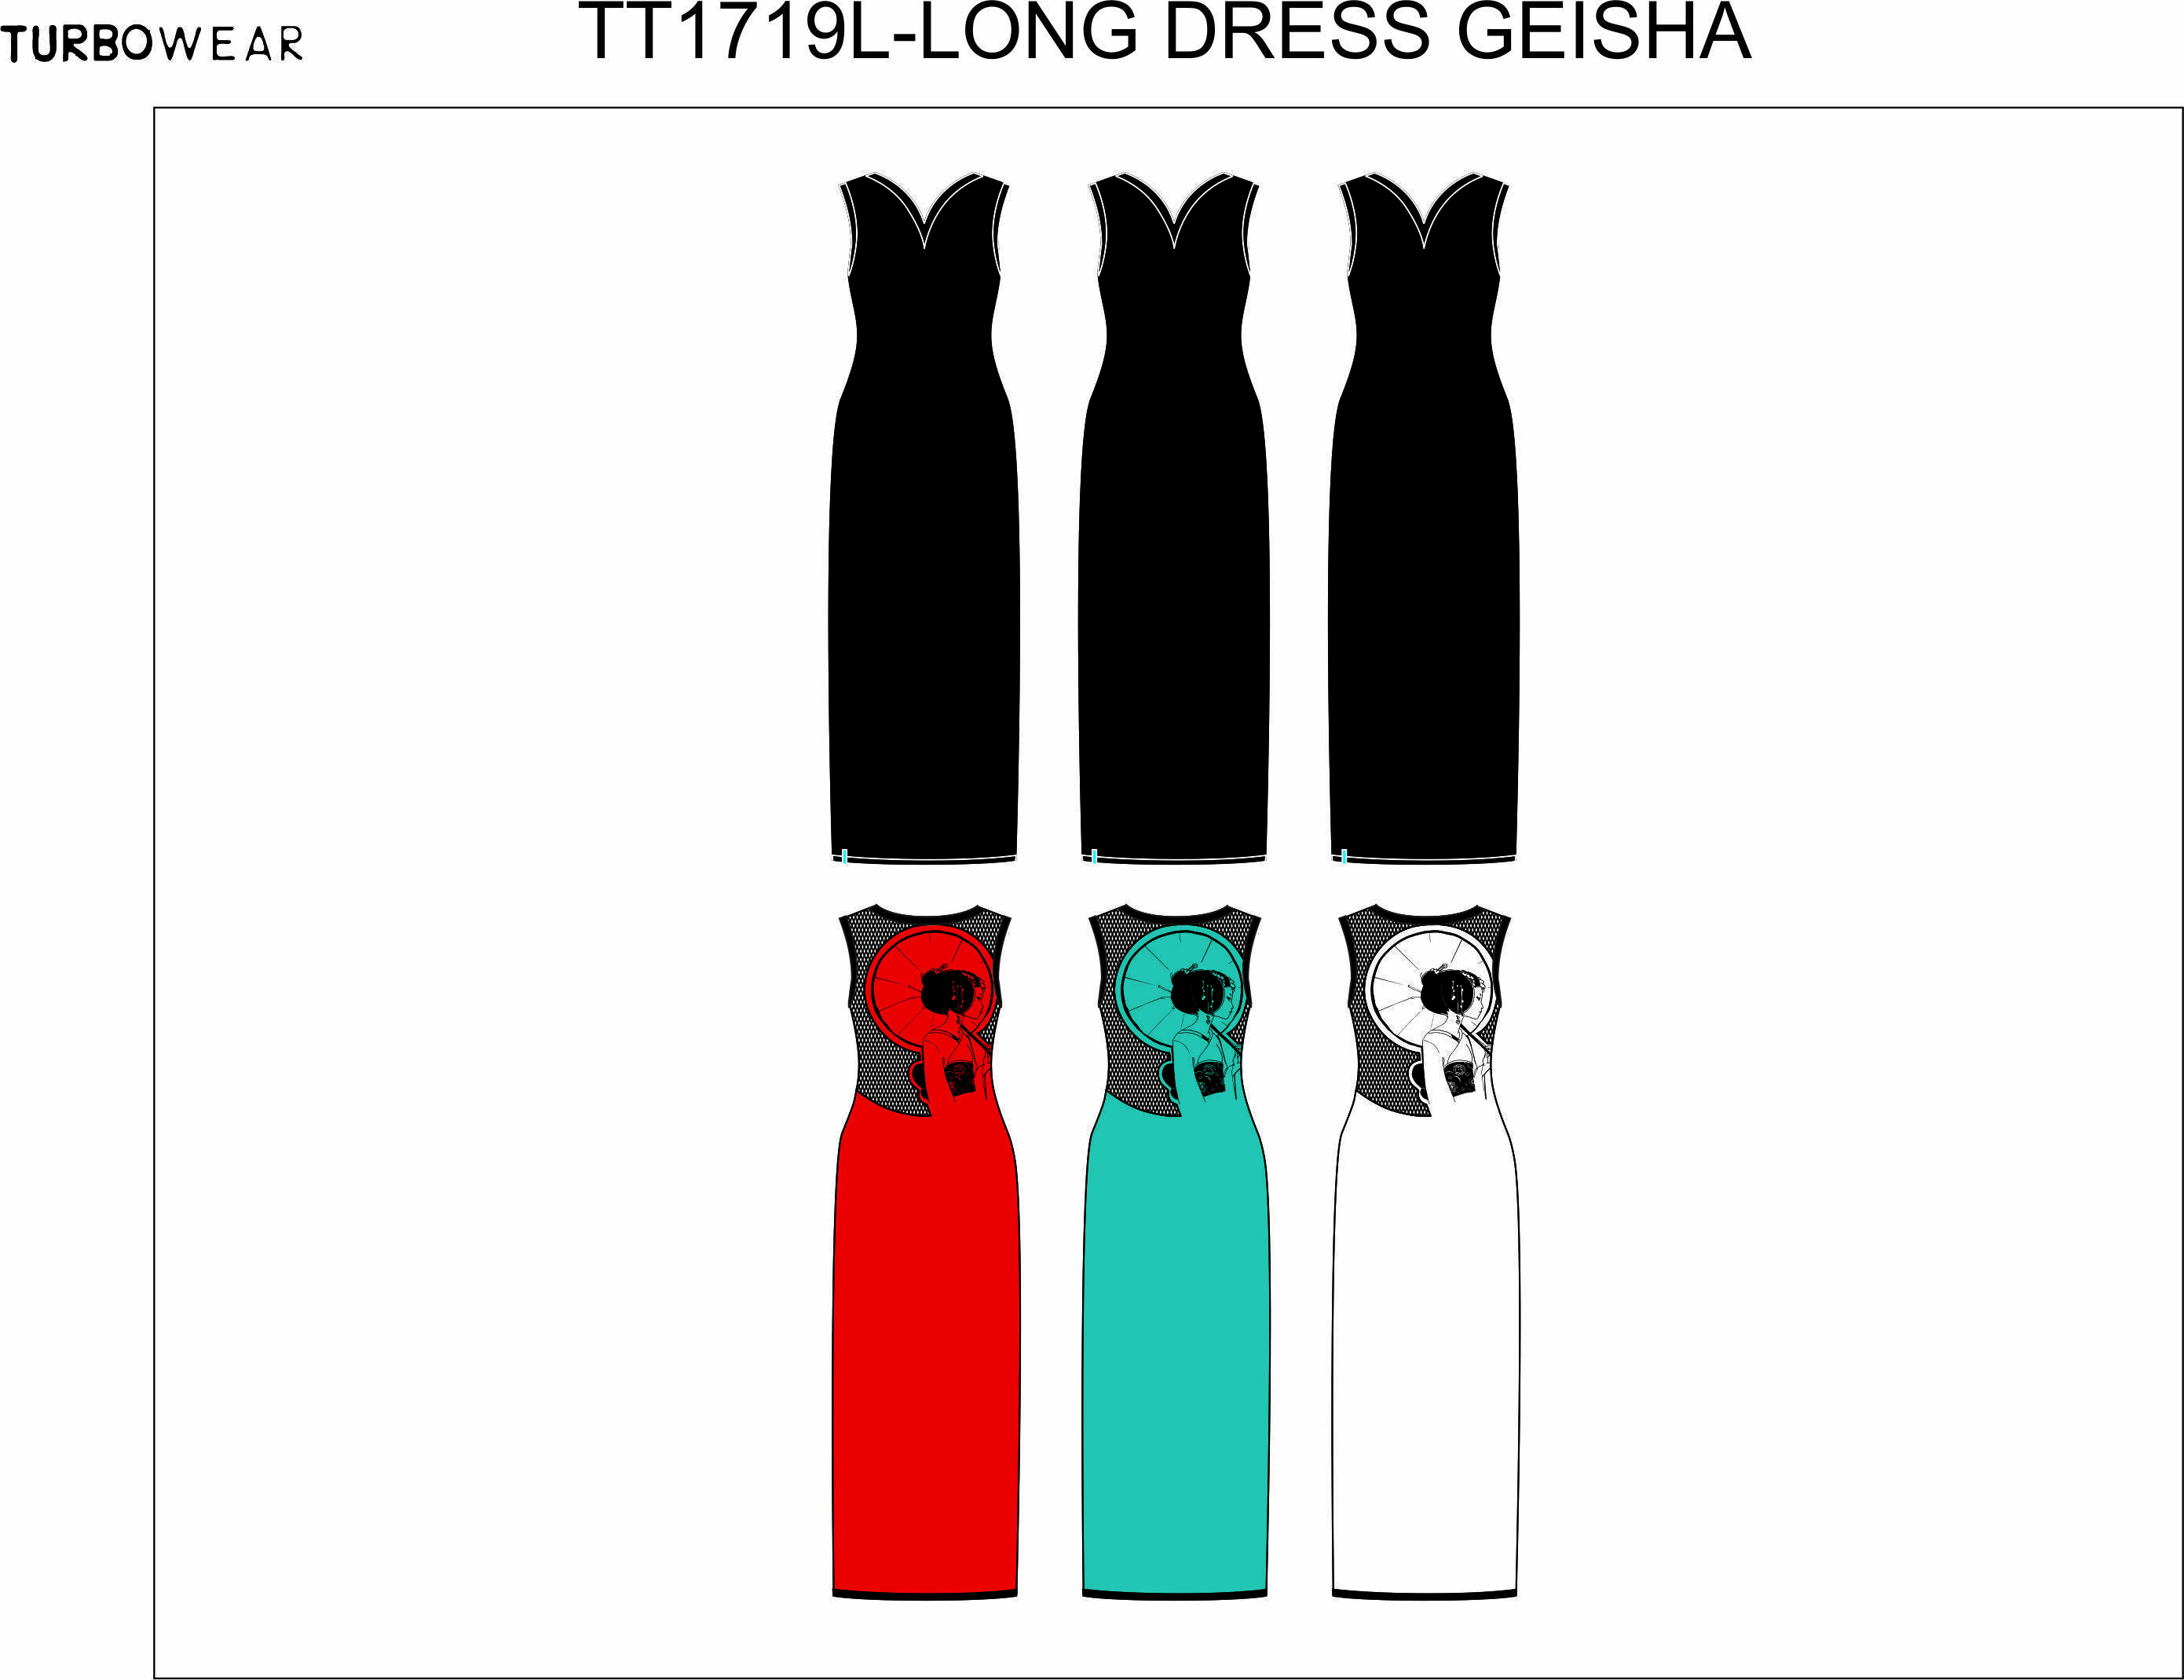 Pygmees Paris: Bring It Back! Color Intrigue Geisha Dress (Only available in: Black Front, Turquoise Back)